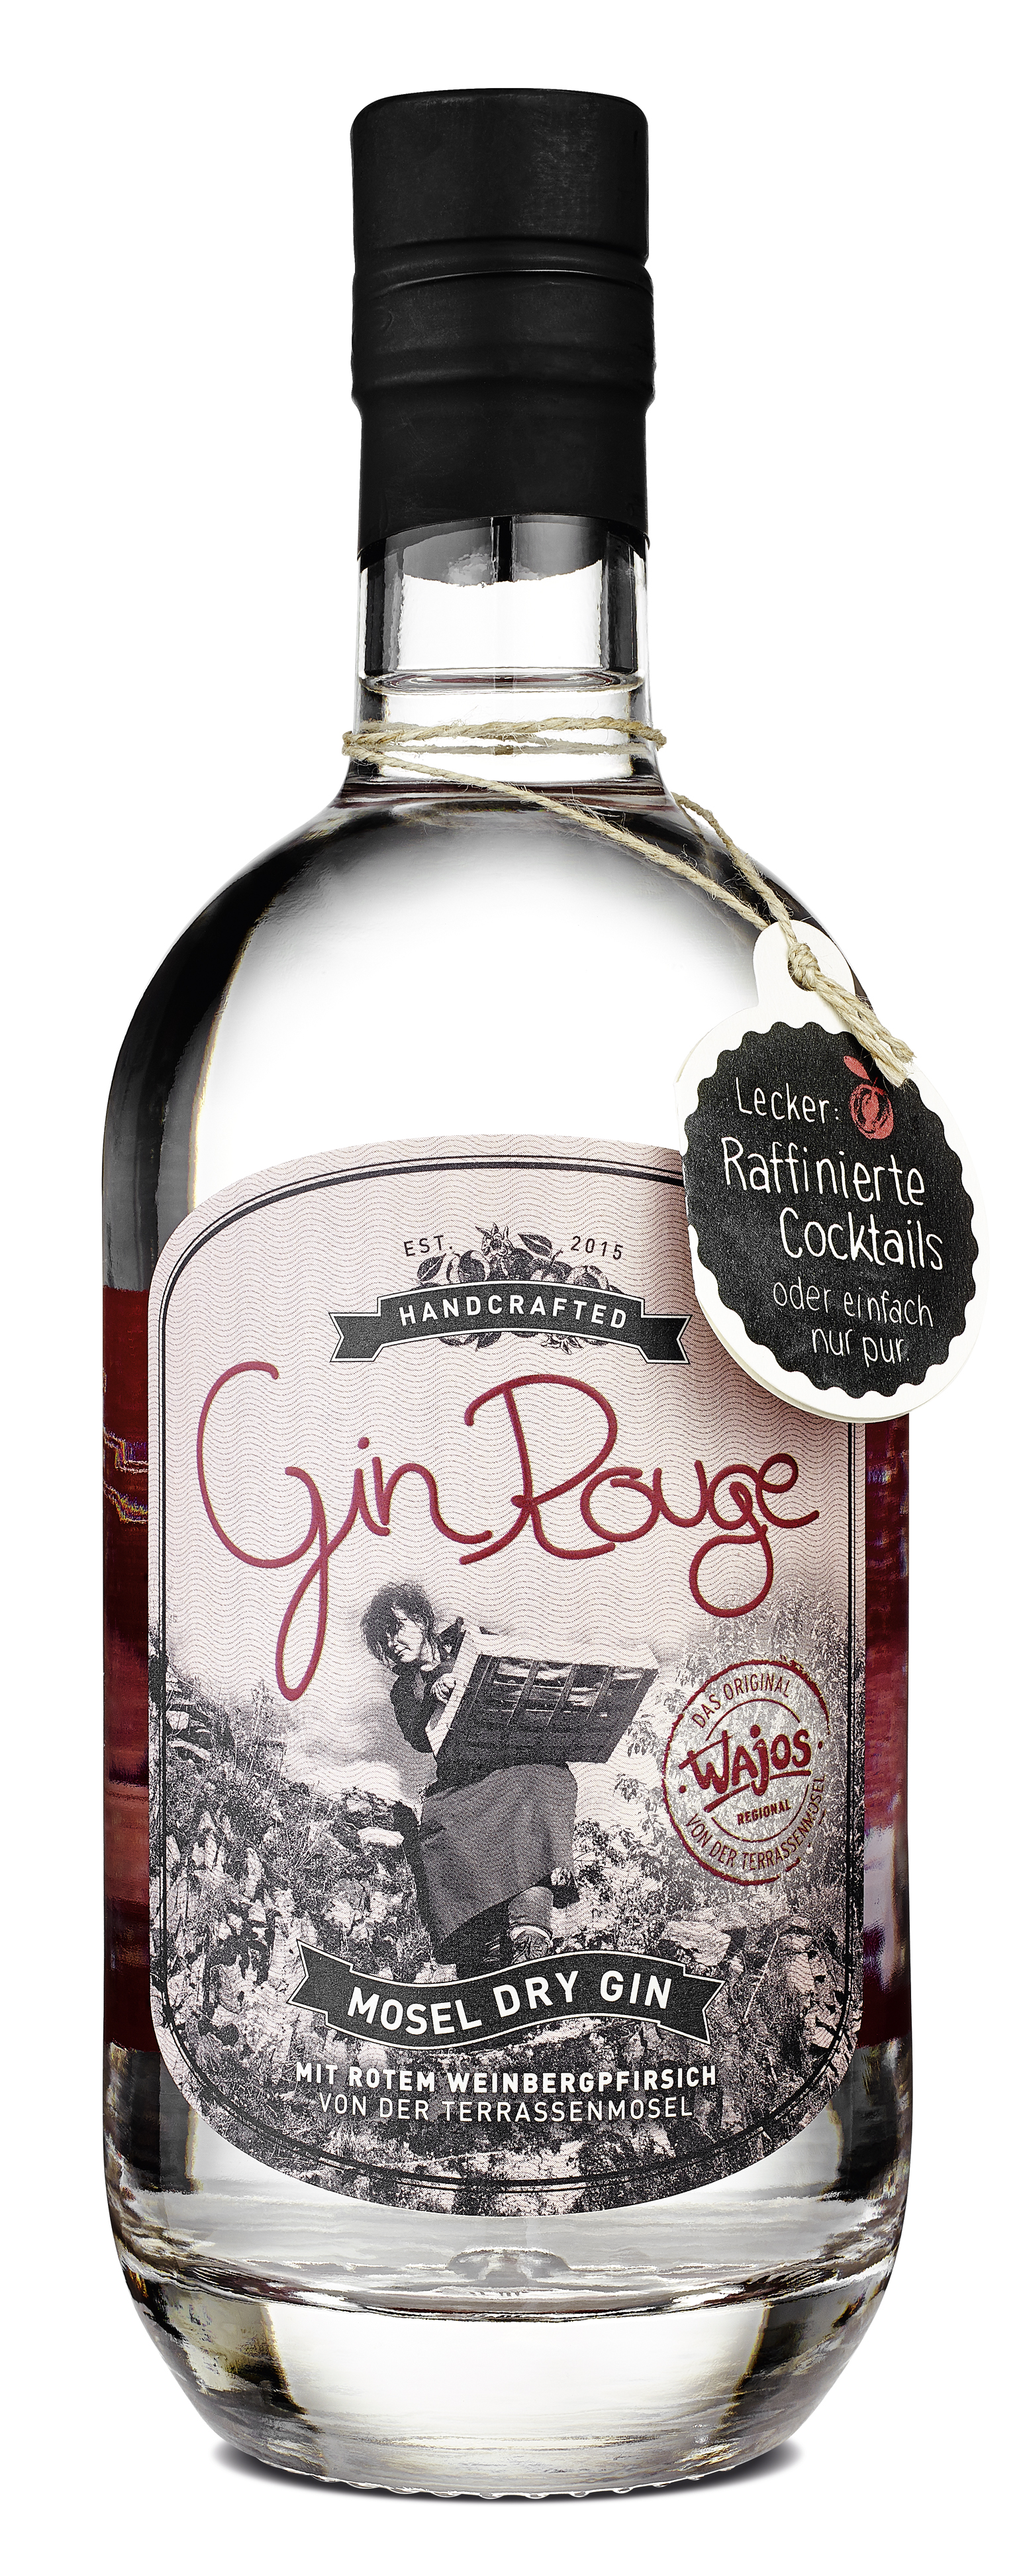 Gin Rouge - Mosel Dry Gin Handcrafted -  0,5l 42%vol.